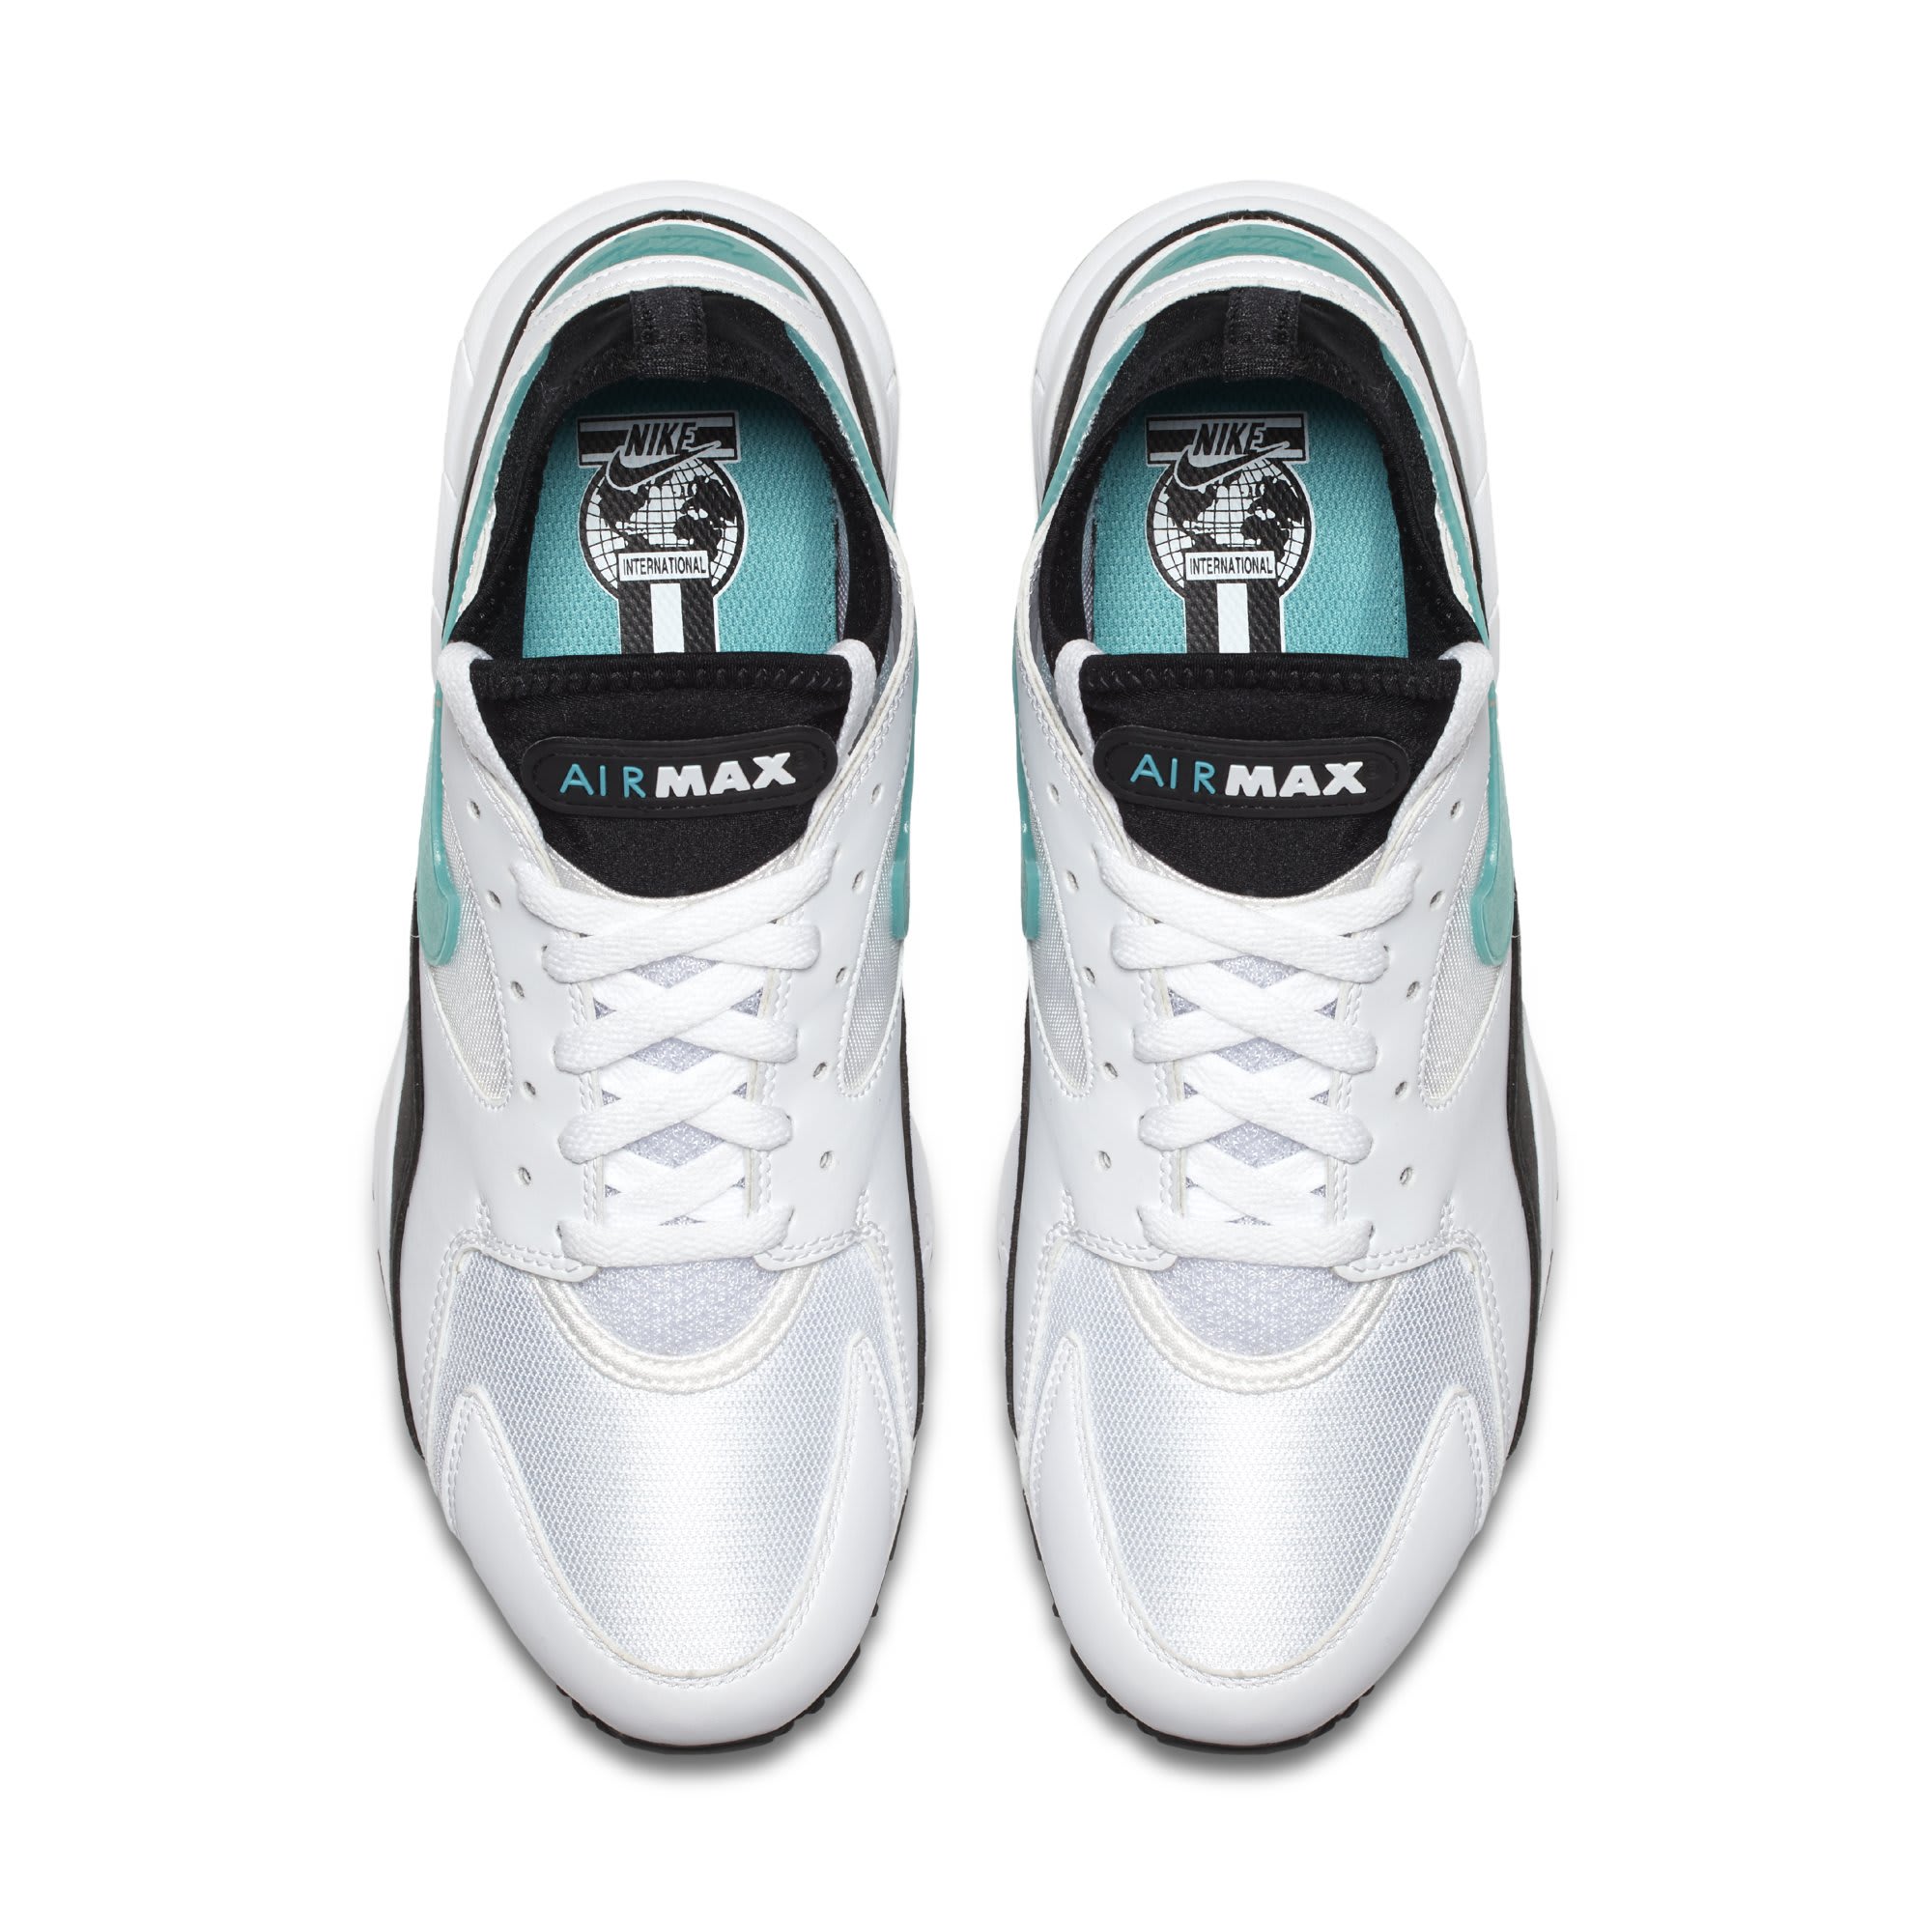 Nike Air Max 93 &#x27;Dusty Cactus&#x27; White/Sport Turquoise-Black 306551-107 (Top)